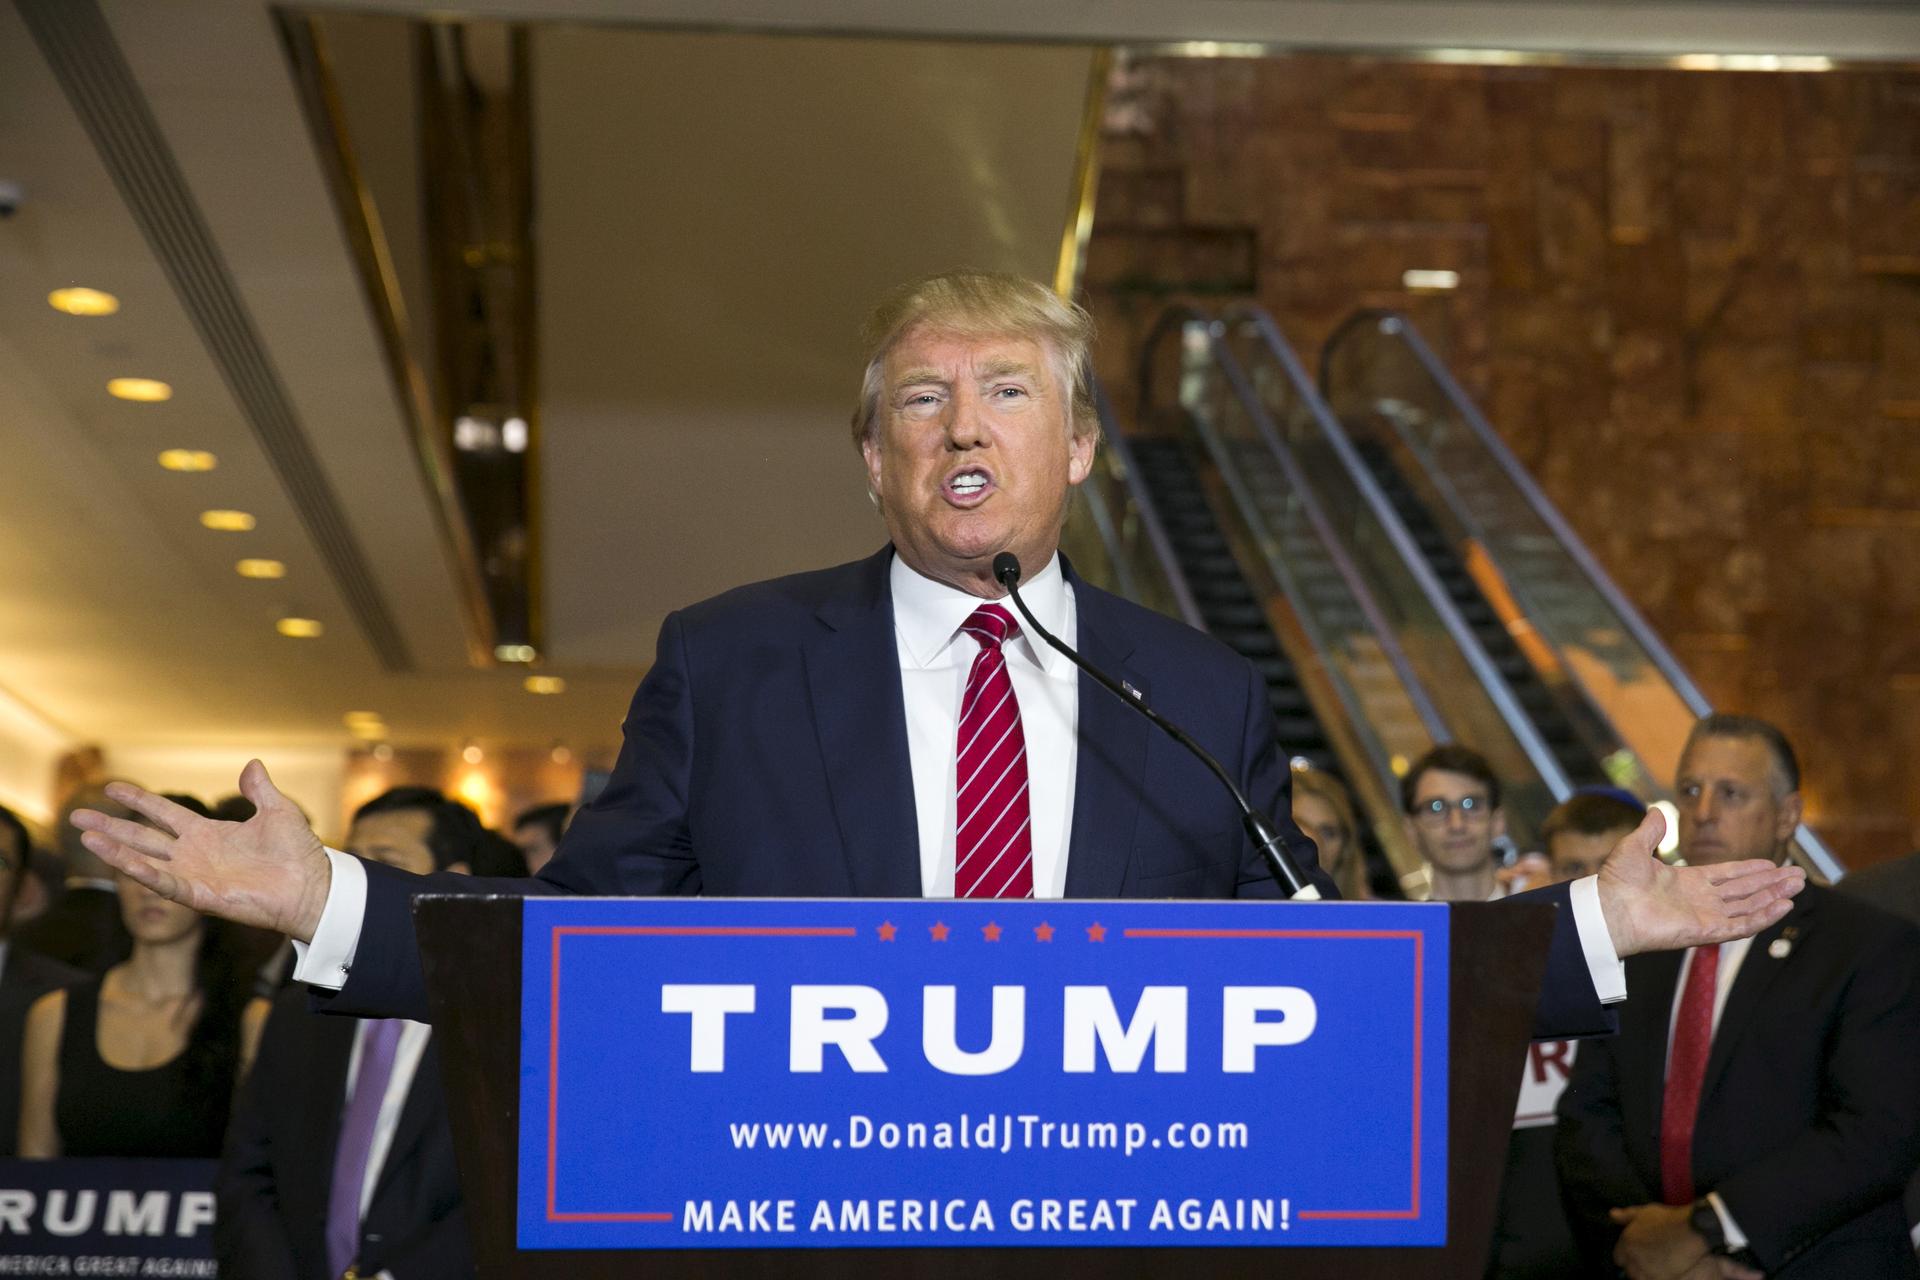 U.S. presidential hopeful Donald Trump speaks during a press availability at Trump Tower in New York City on September 3, 2015.